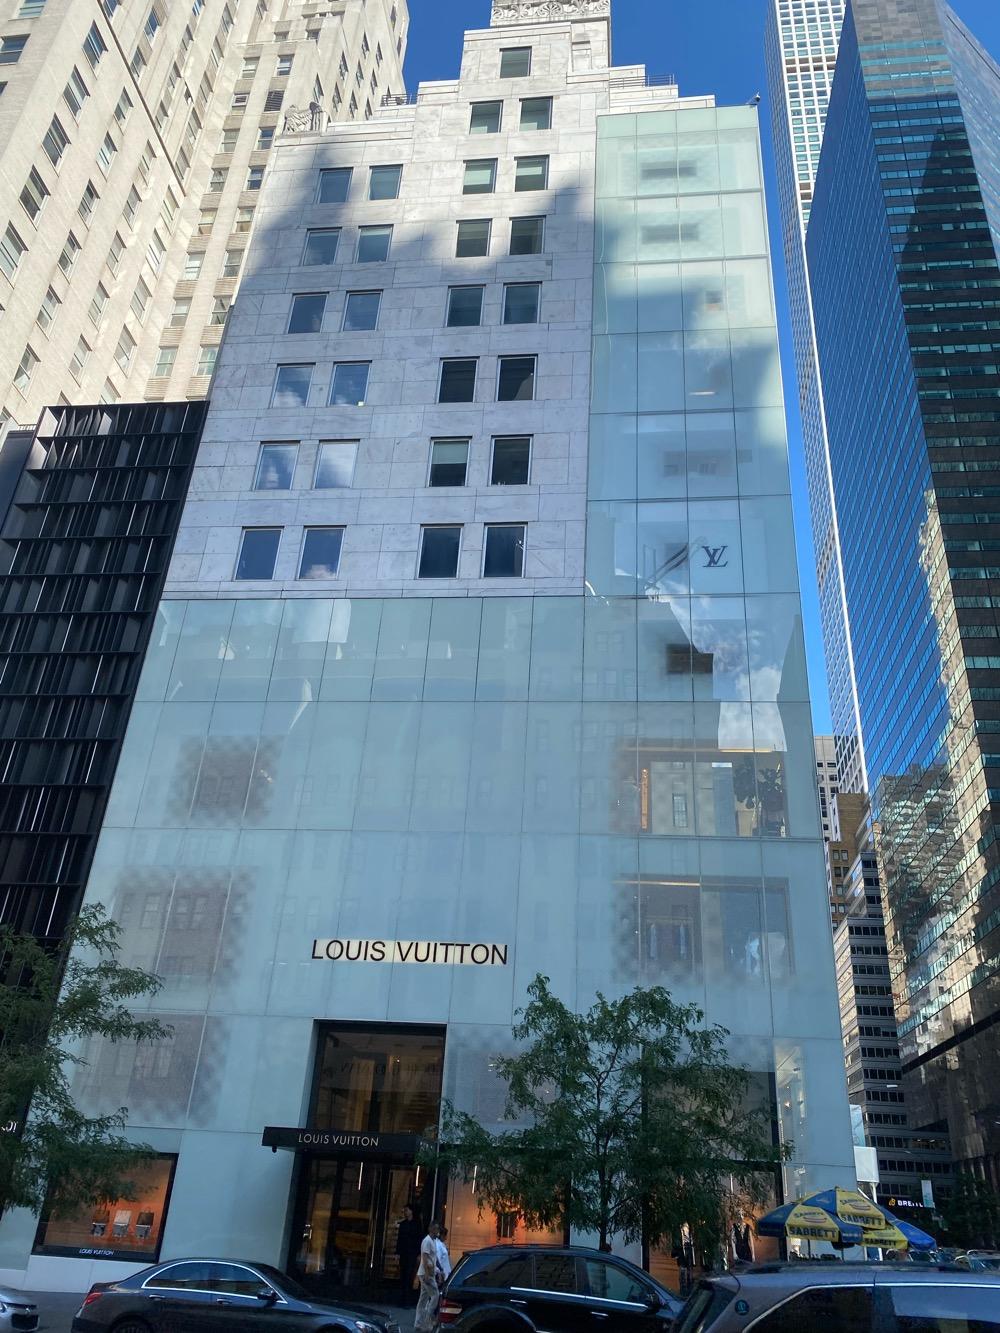 Louis Vuitton, 1 E 57th St, New York, NY. exterior storefront of a